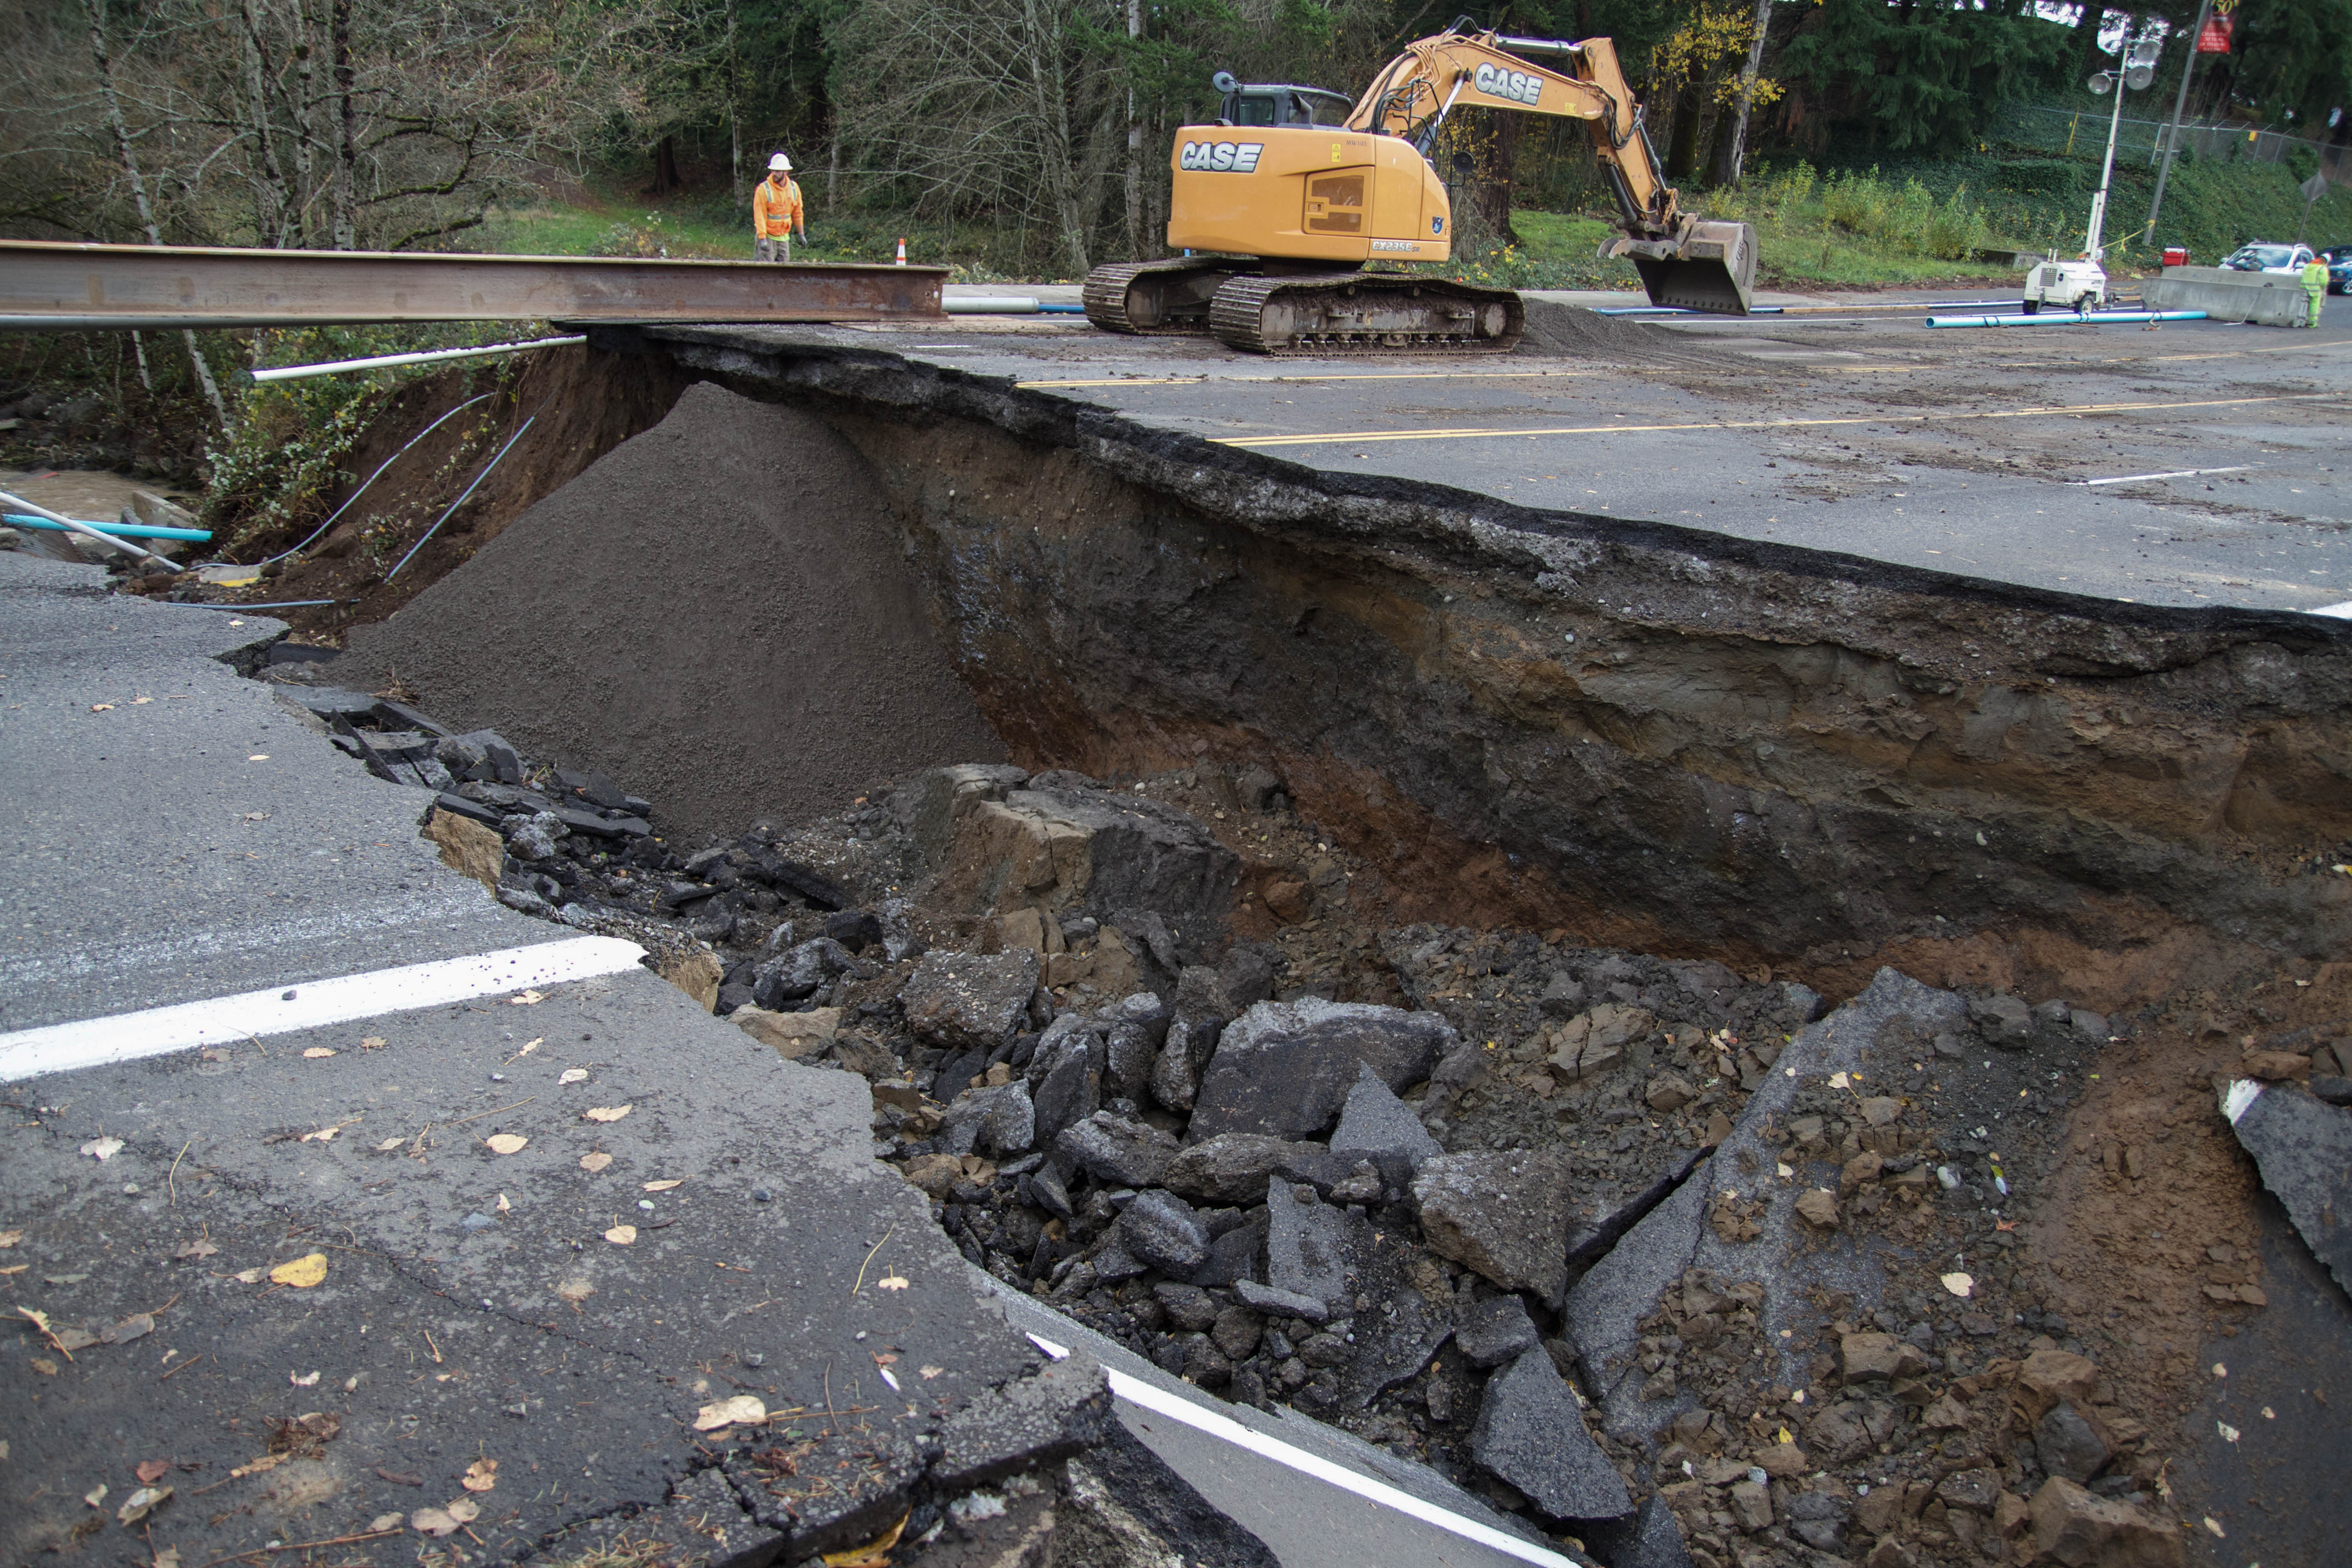 Image of the sinkhole days after the initial rupture, after being further demolished to expand across the whole street. Taken by Nick Pelster.